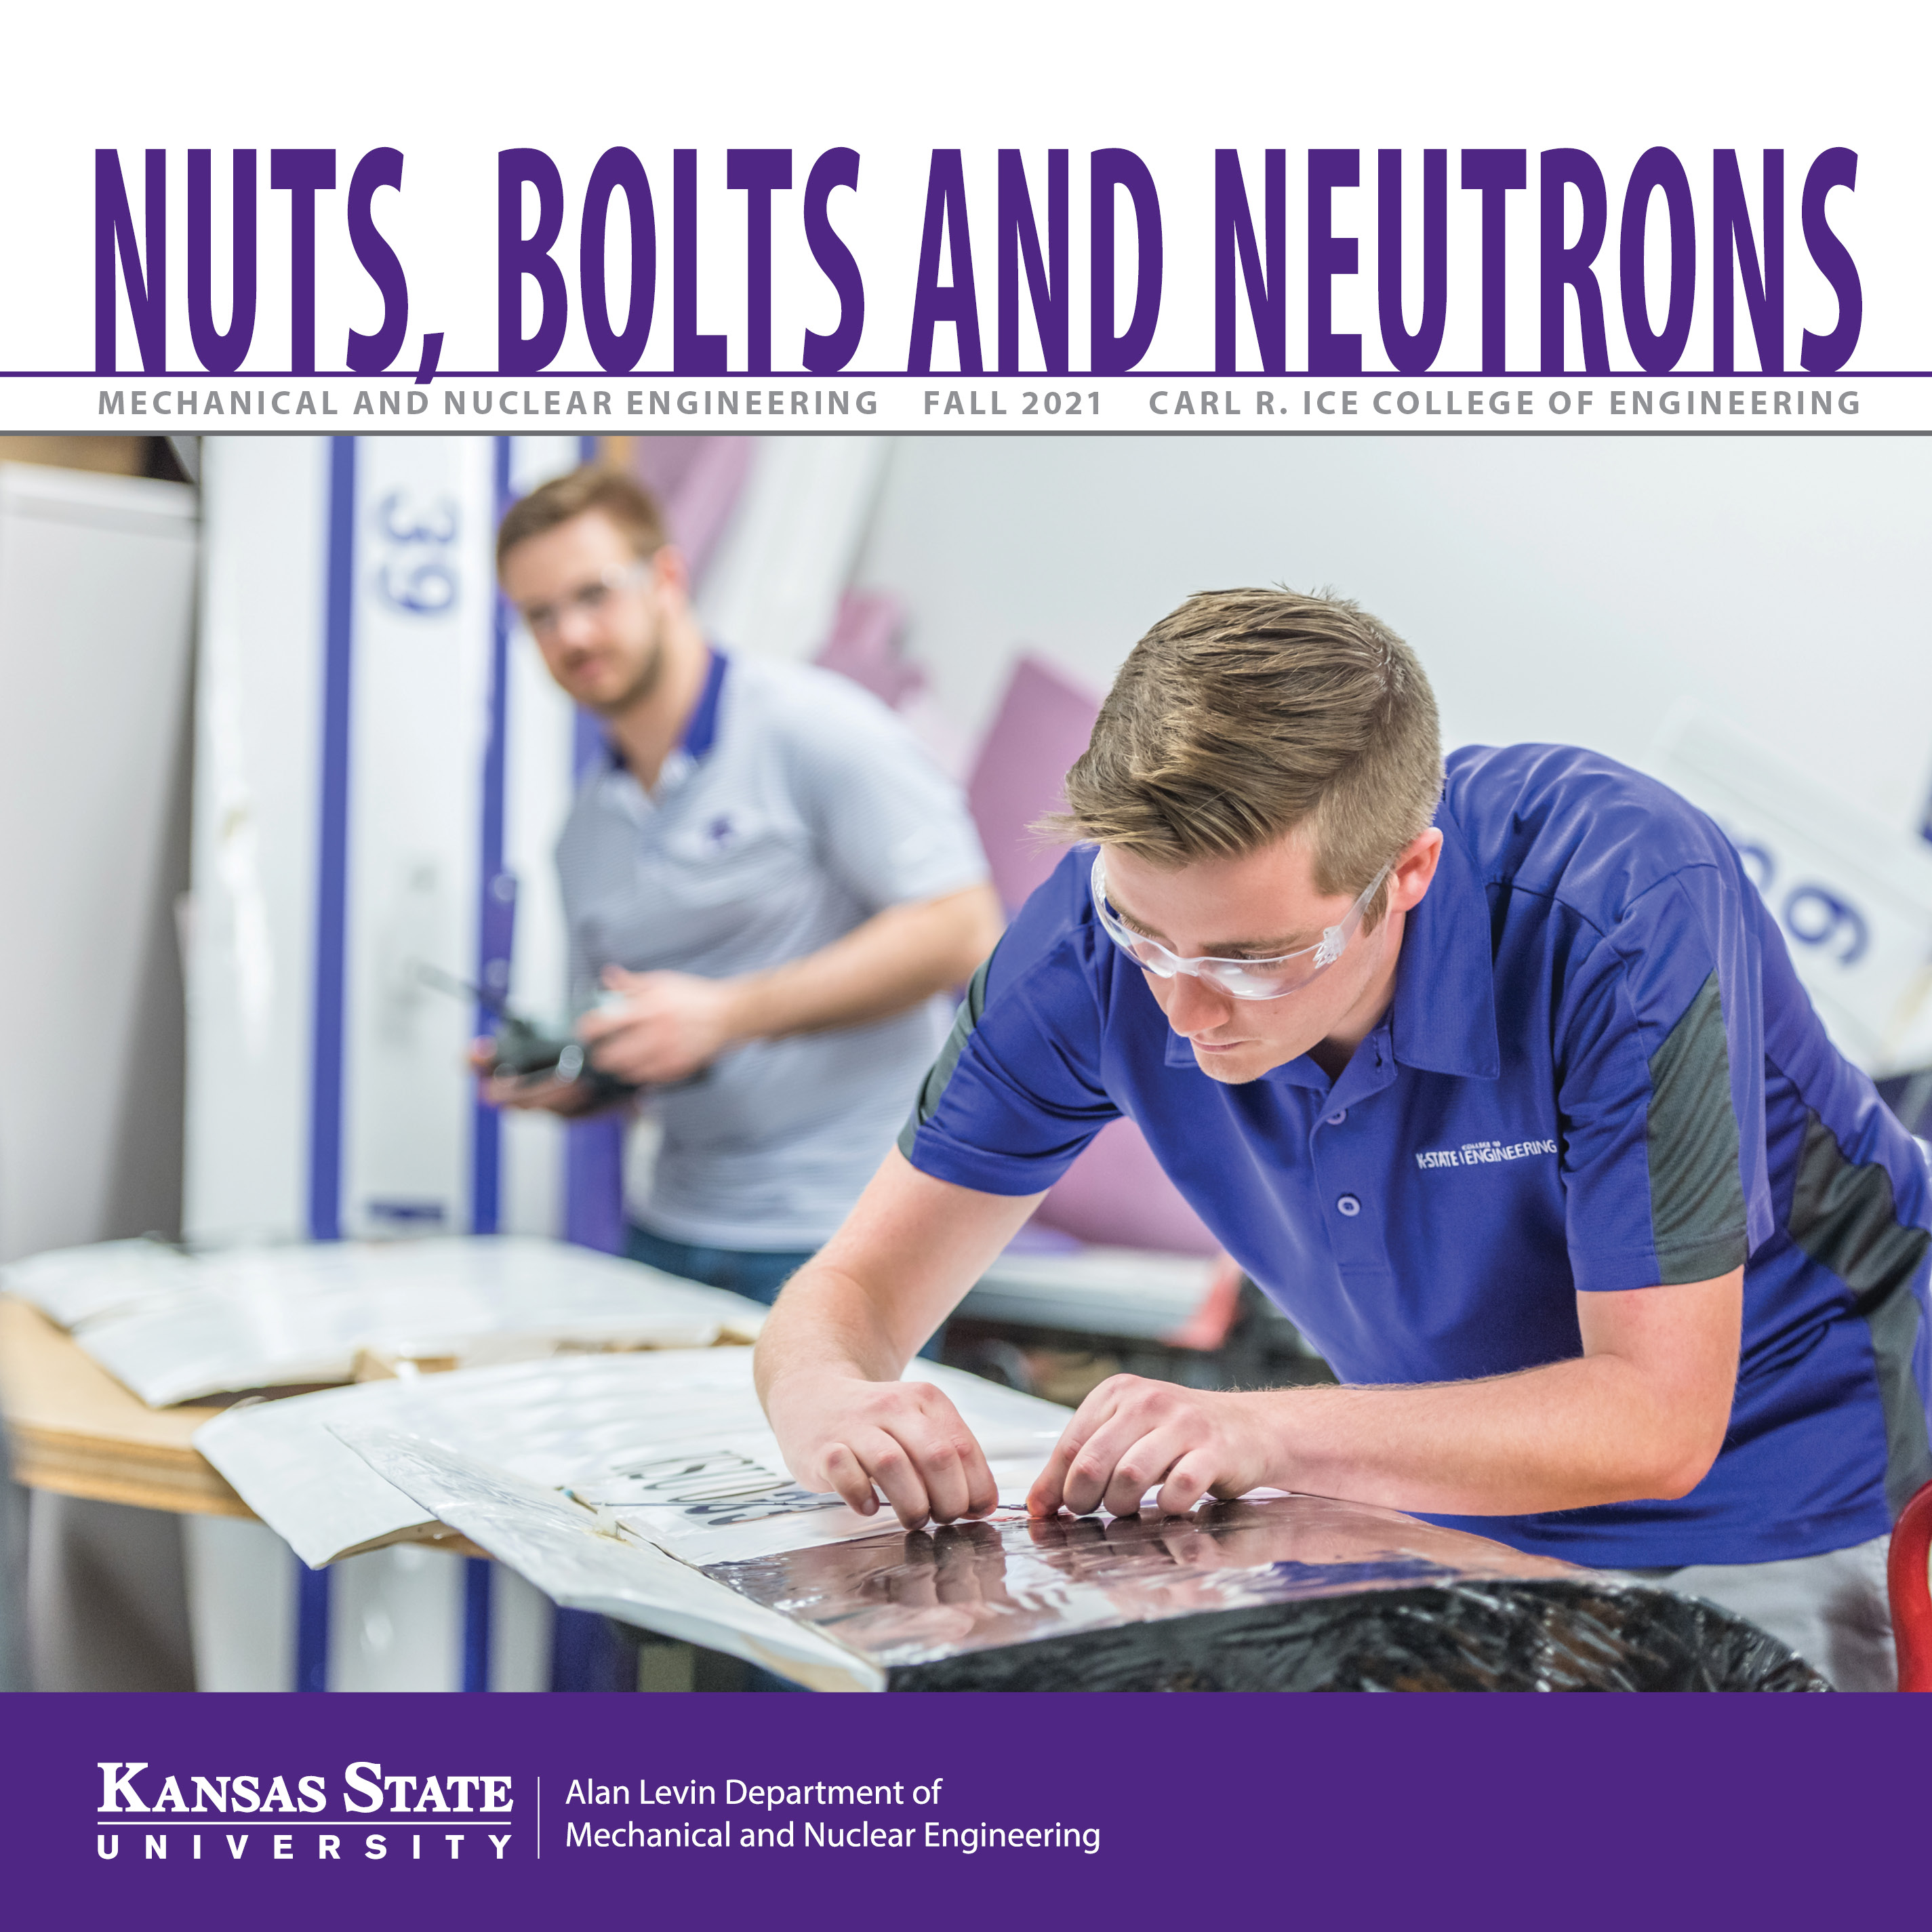 Nuts, Bolts and Neutrons magazine